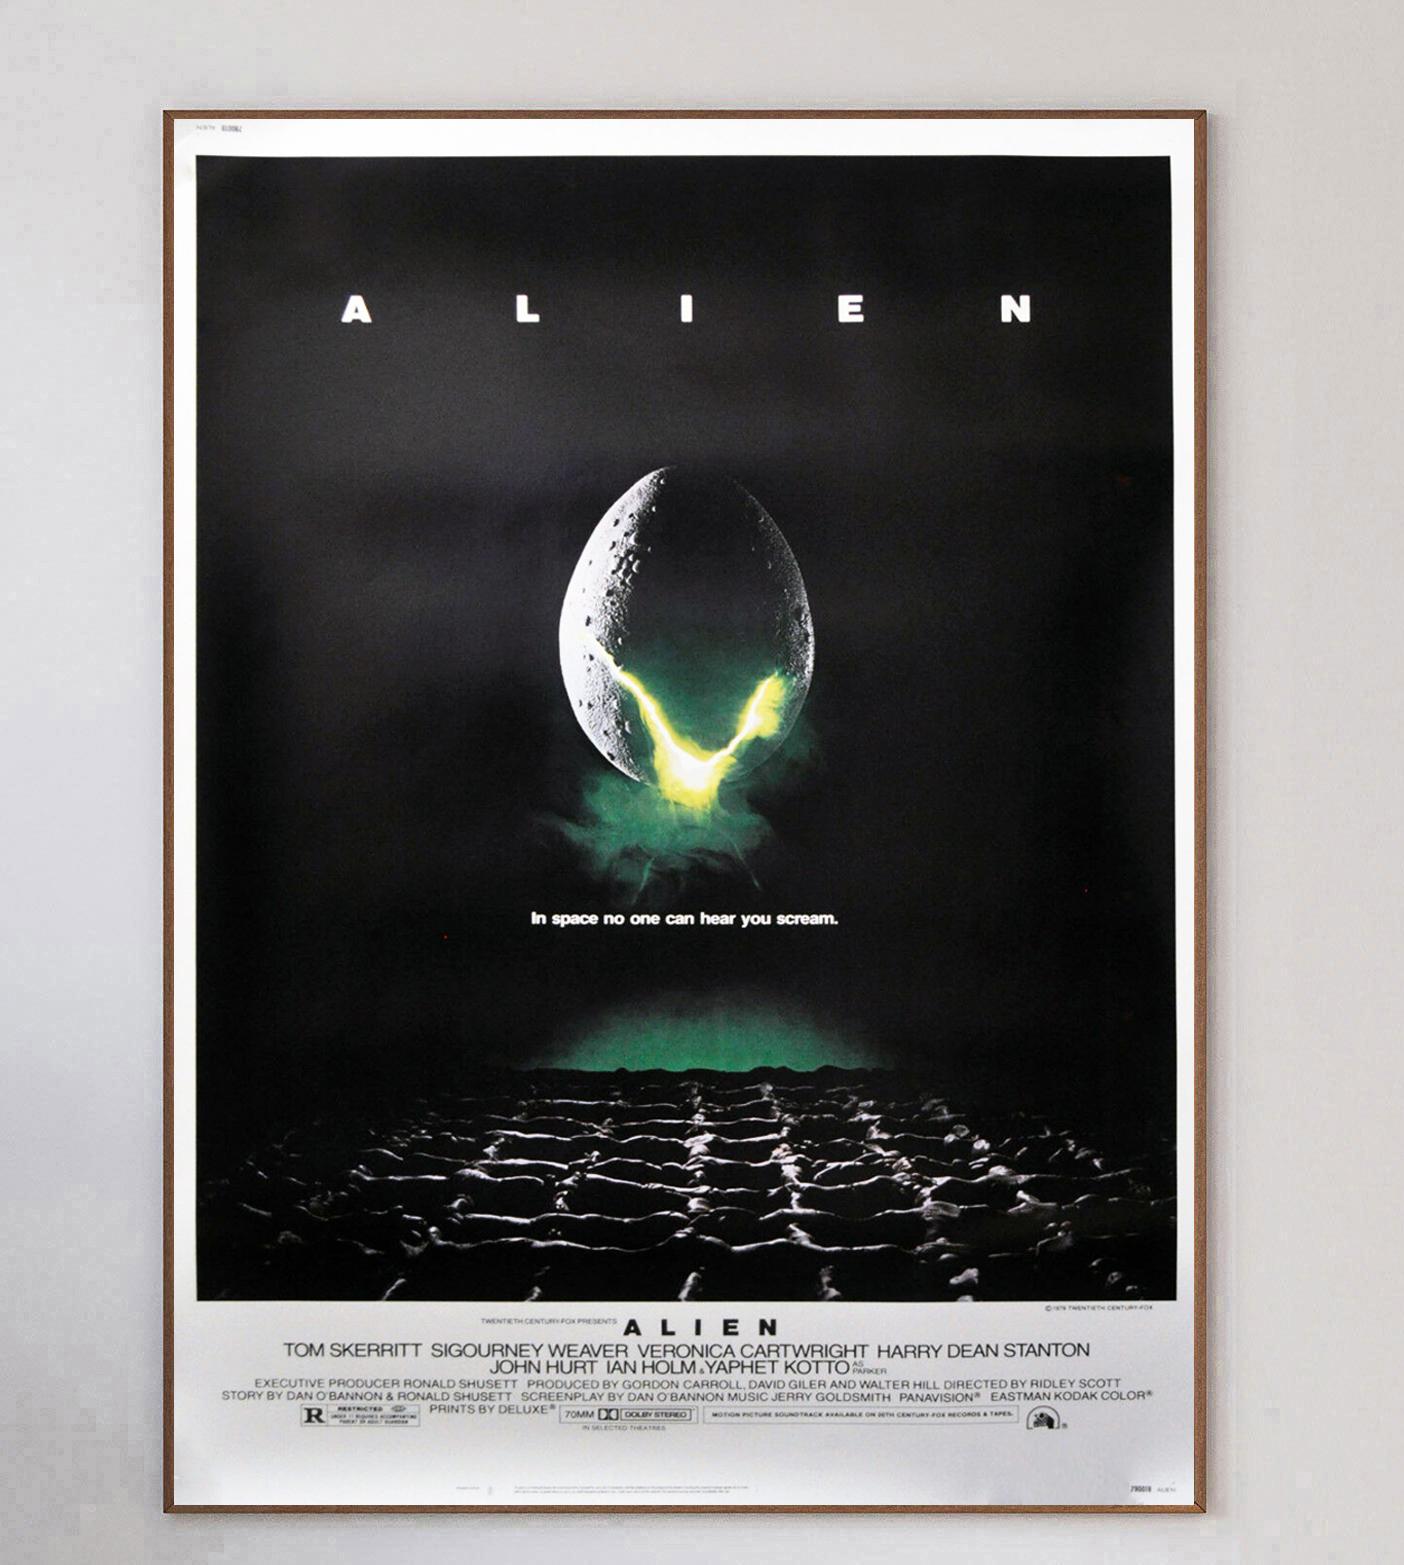 One of the greatest and most influential sci-fi films of all time, Ridley Scott's classic space horror 